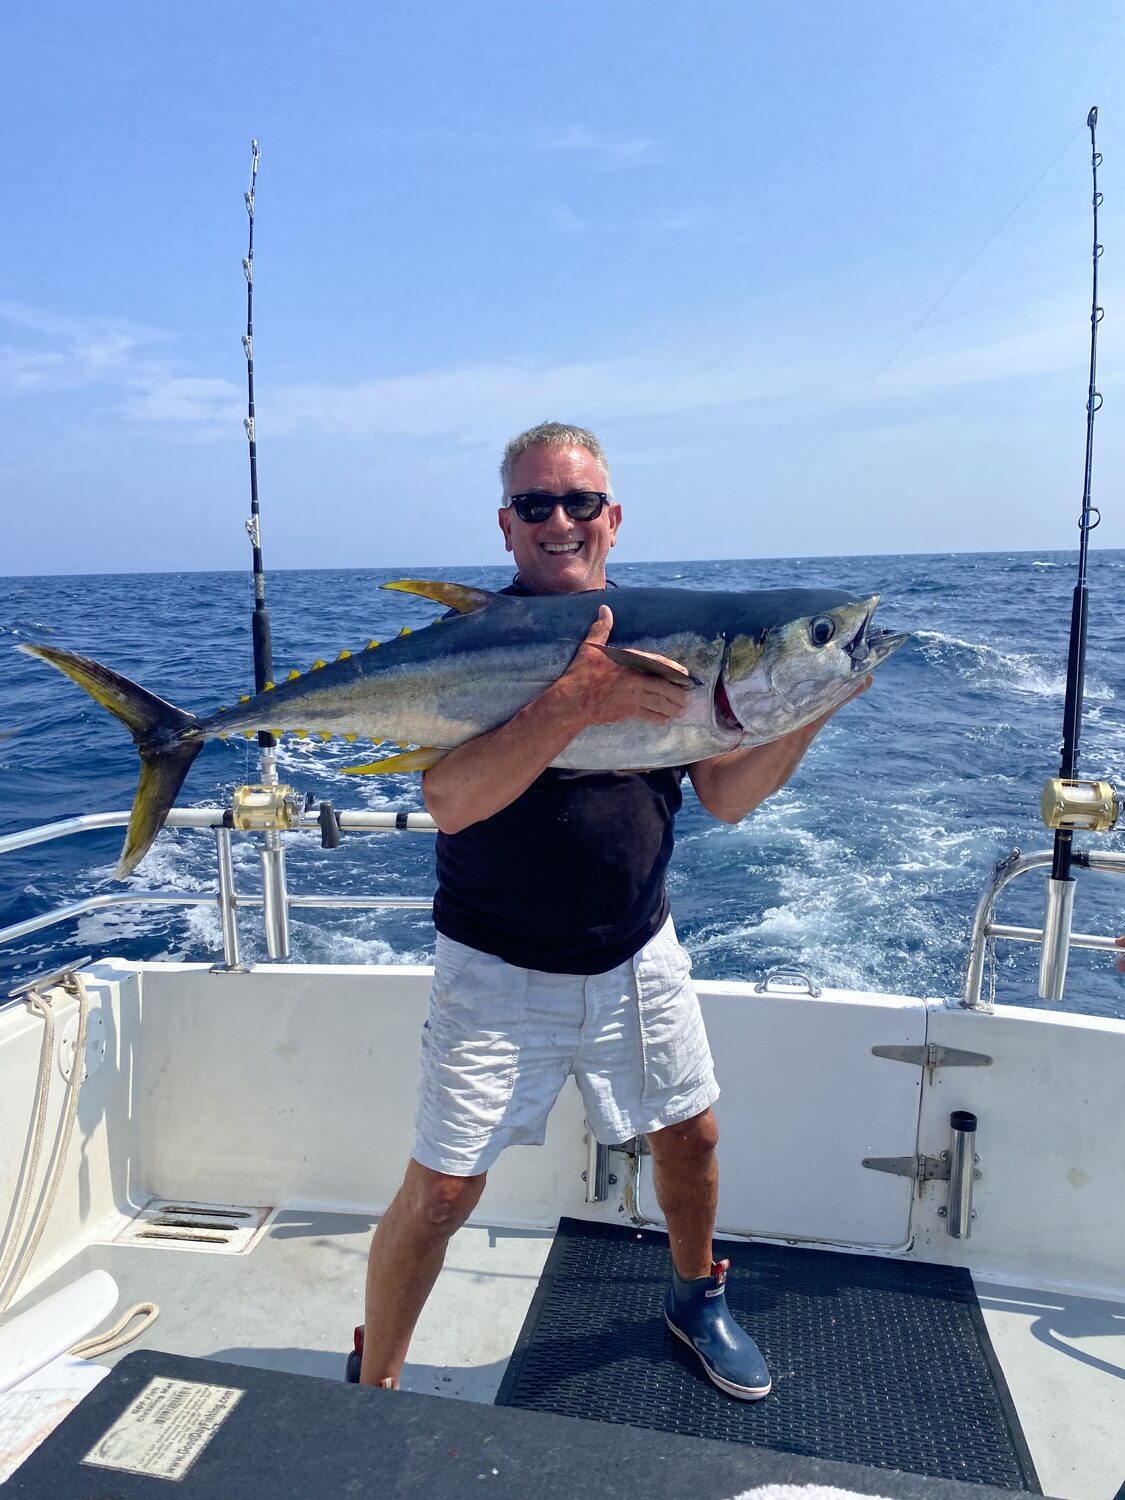 John Stafford of East Hampton caught this nice yellowfin while fishing aboard the Double D, a Montauk-based charter boat. 
CAPT. DAN GIUNTA